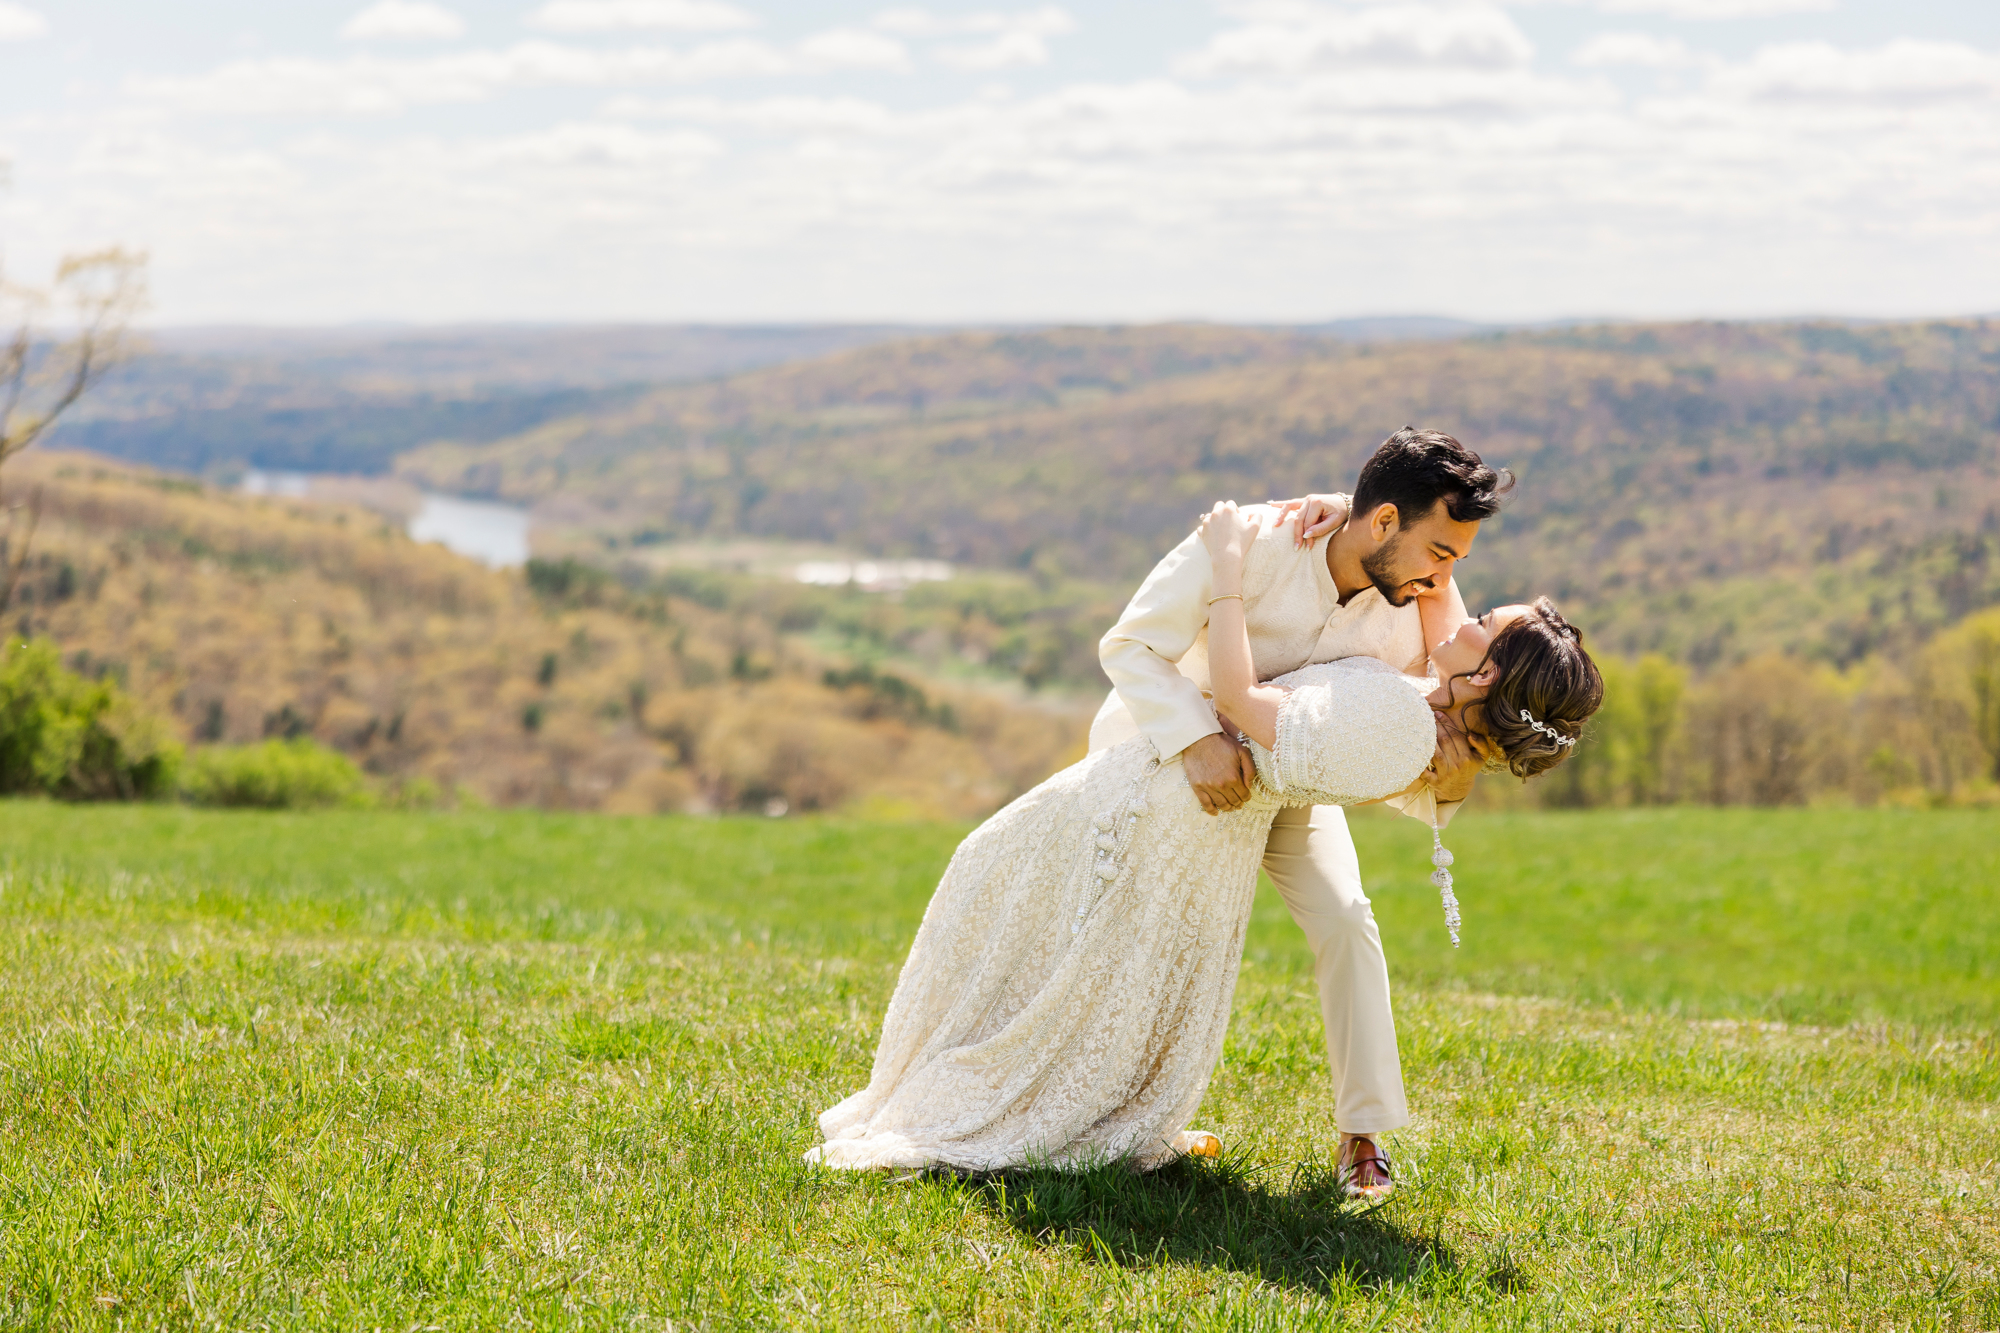 Playful Summertime Seminary Hill Wedding in NY